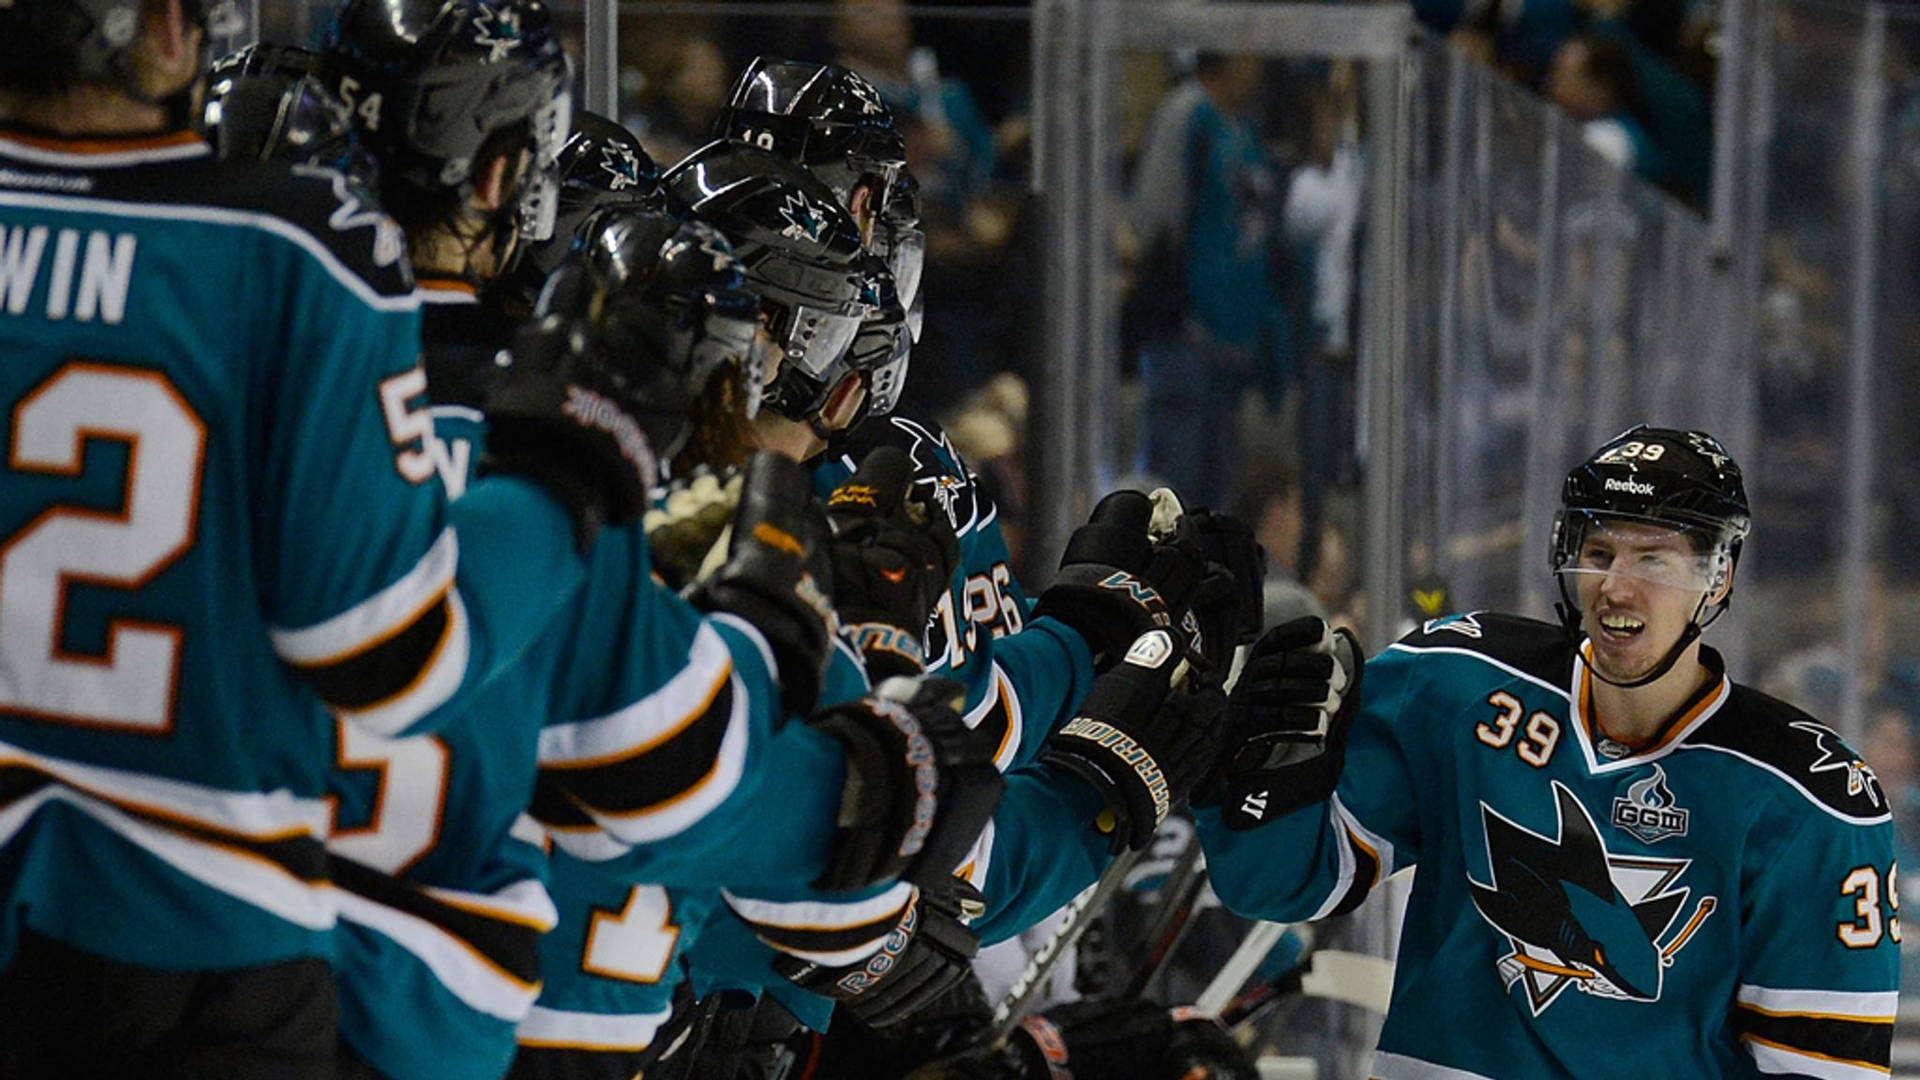 Logan Couture, Professional Ice Hockey Player, Celebrating A Great Play With A Fist Bump To His Teammates. Background